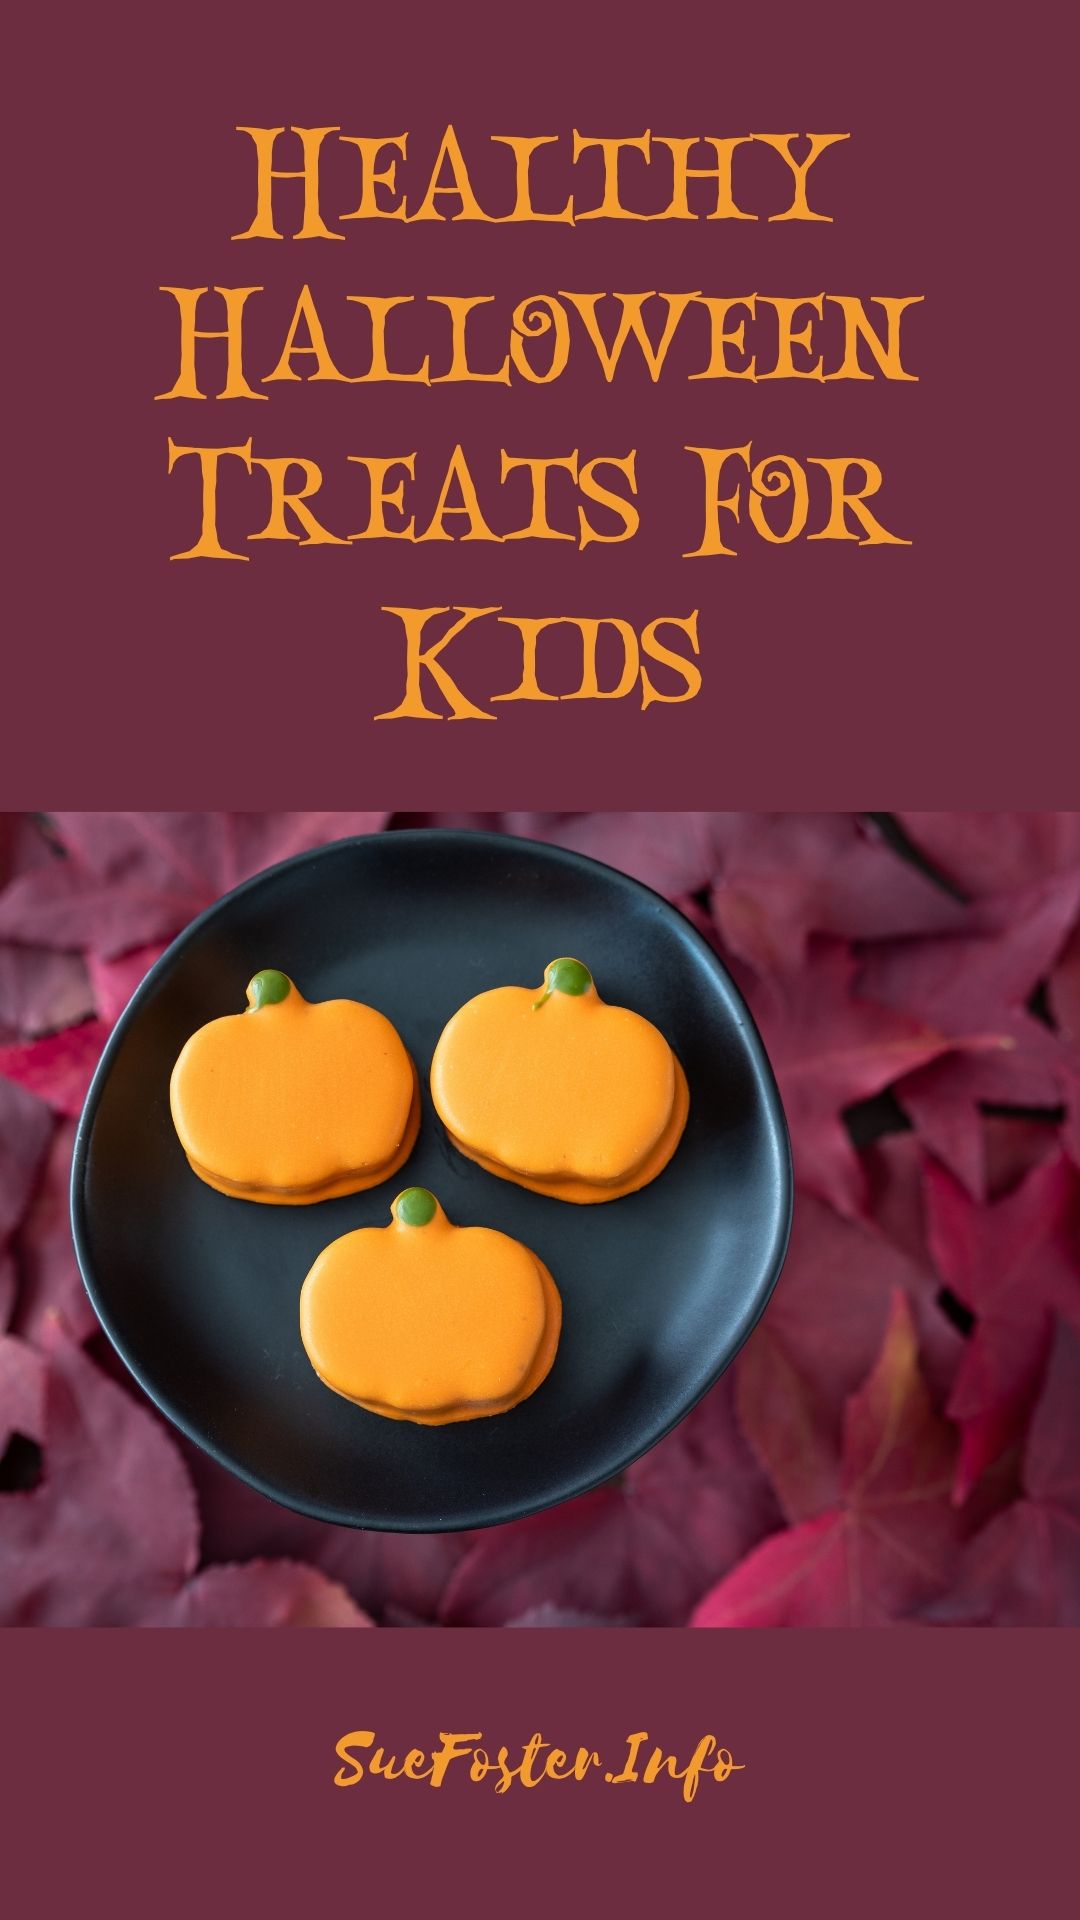 Here are some treat ideas for Halloween that are low on sugar yet still a lot of fun.